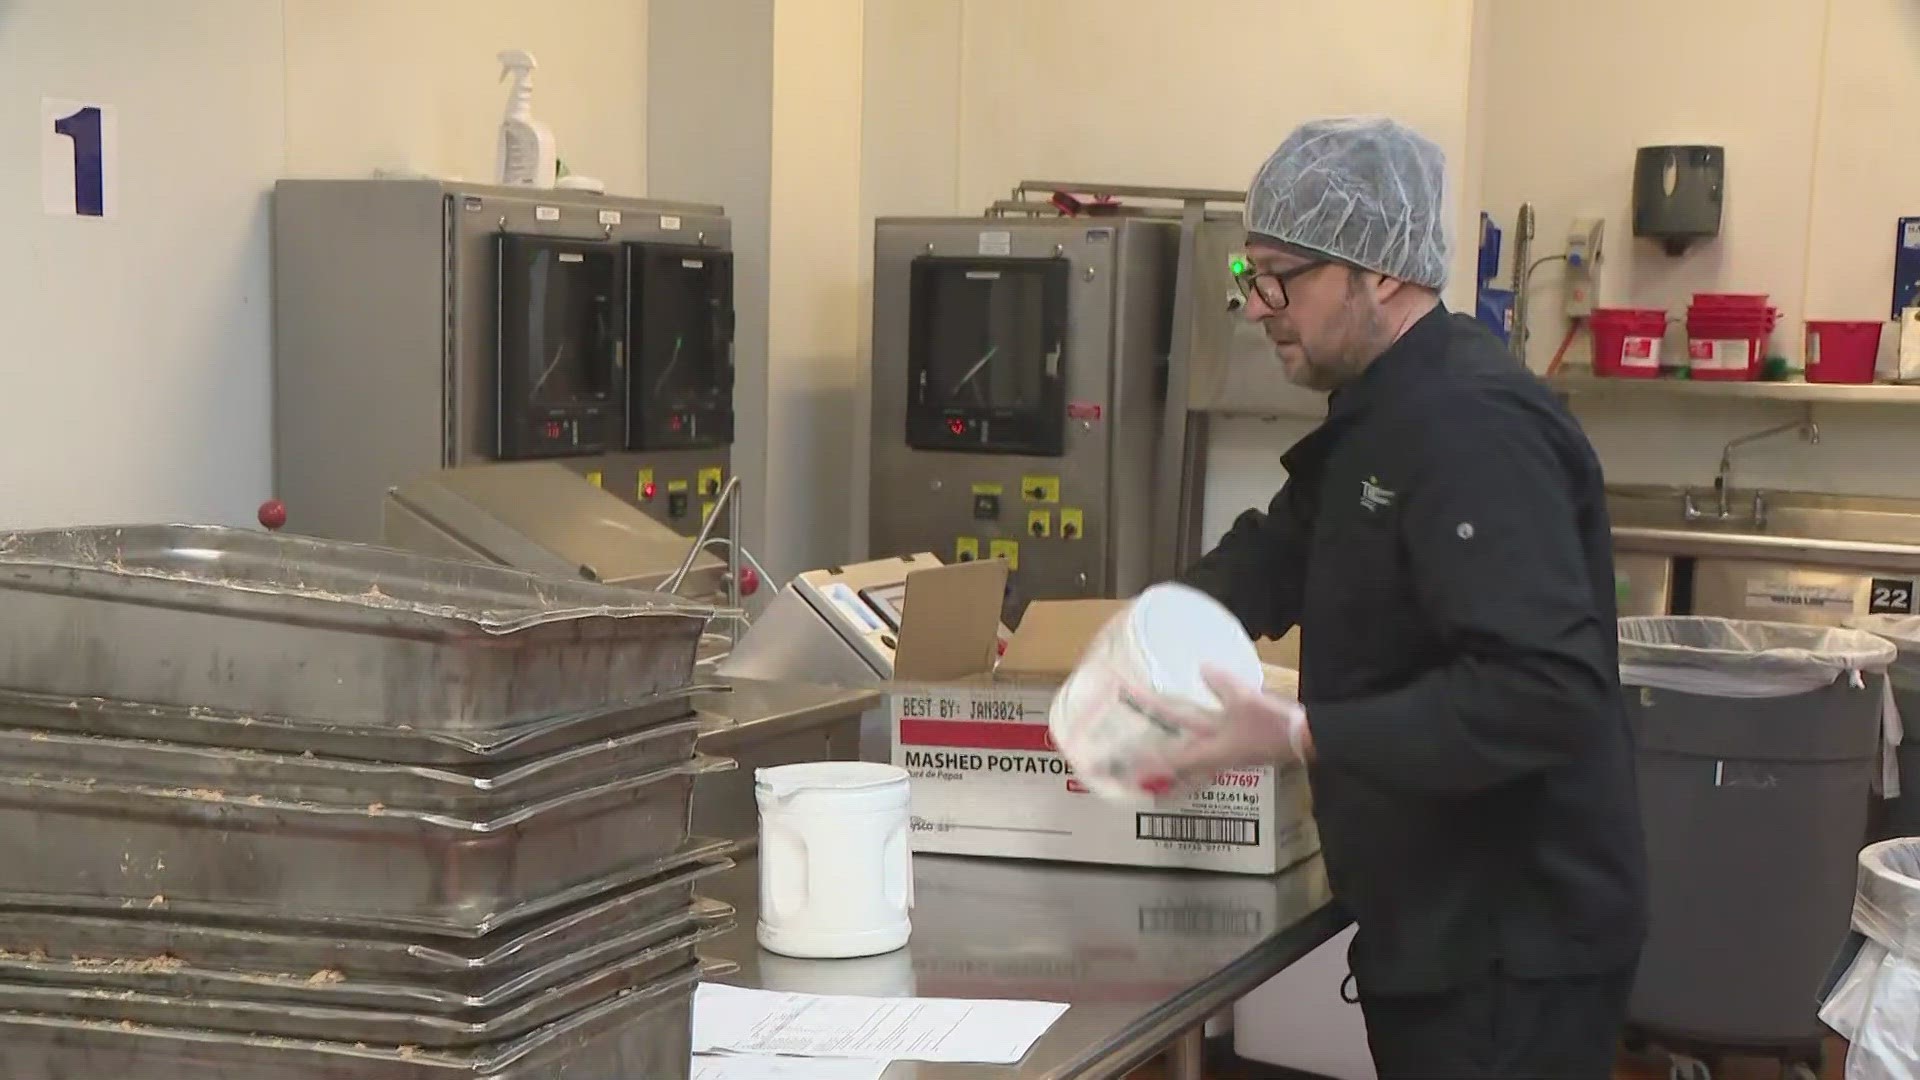 Feedmore WNY's March for Meals program helps bring home delivered meals to those in need.